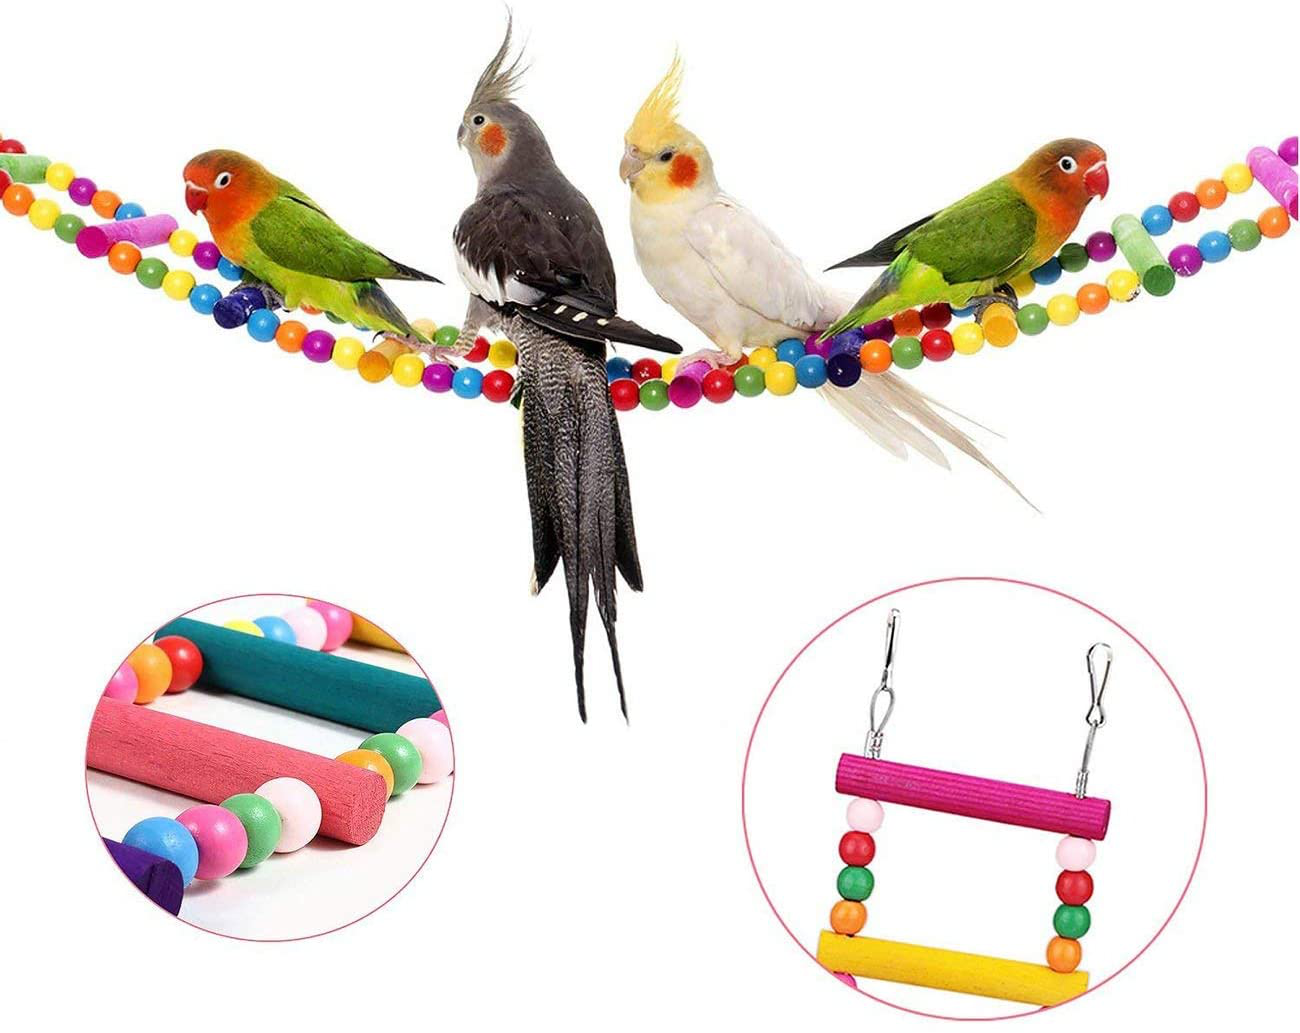 Uheng Colorful Bird Ladder Toys for Parrot, Pet Swings Chew Hanging Bridge, Wooden Rainbow Cage Training Accessories for Cockatiel Conure Parakeet Small Macaw Budgie Animals & Pet Supplies > Pet Supplies > Bird Supplies > Bird Ladders & Perches Uheng   